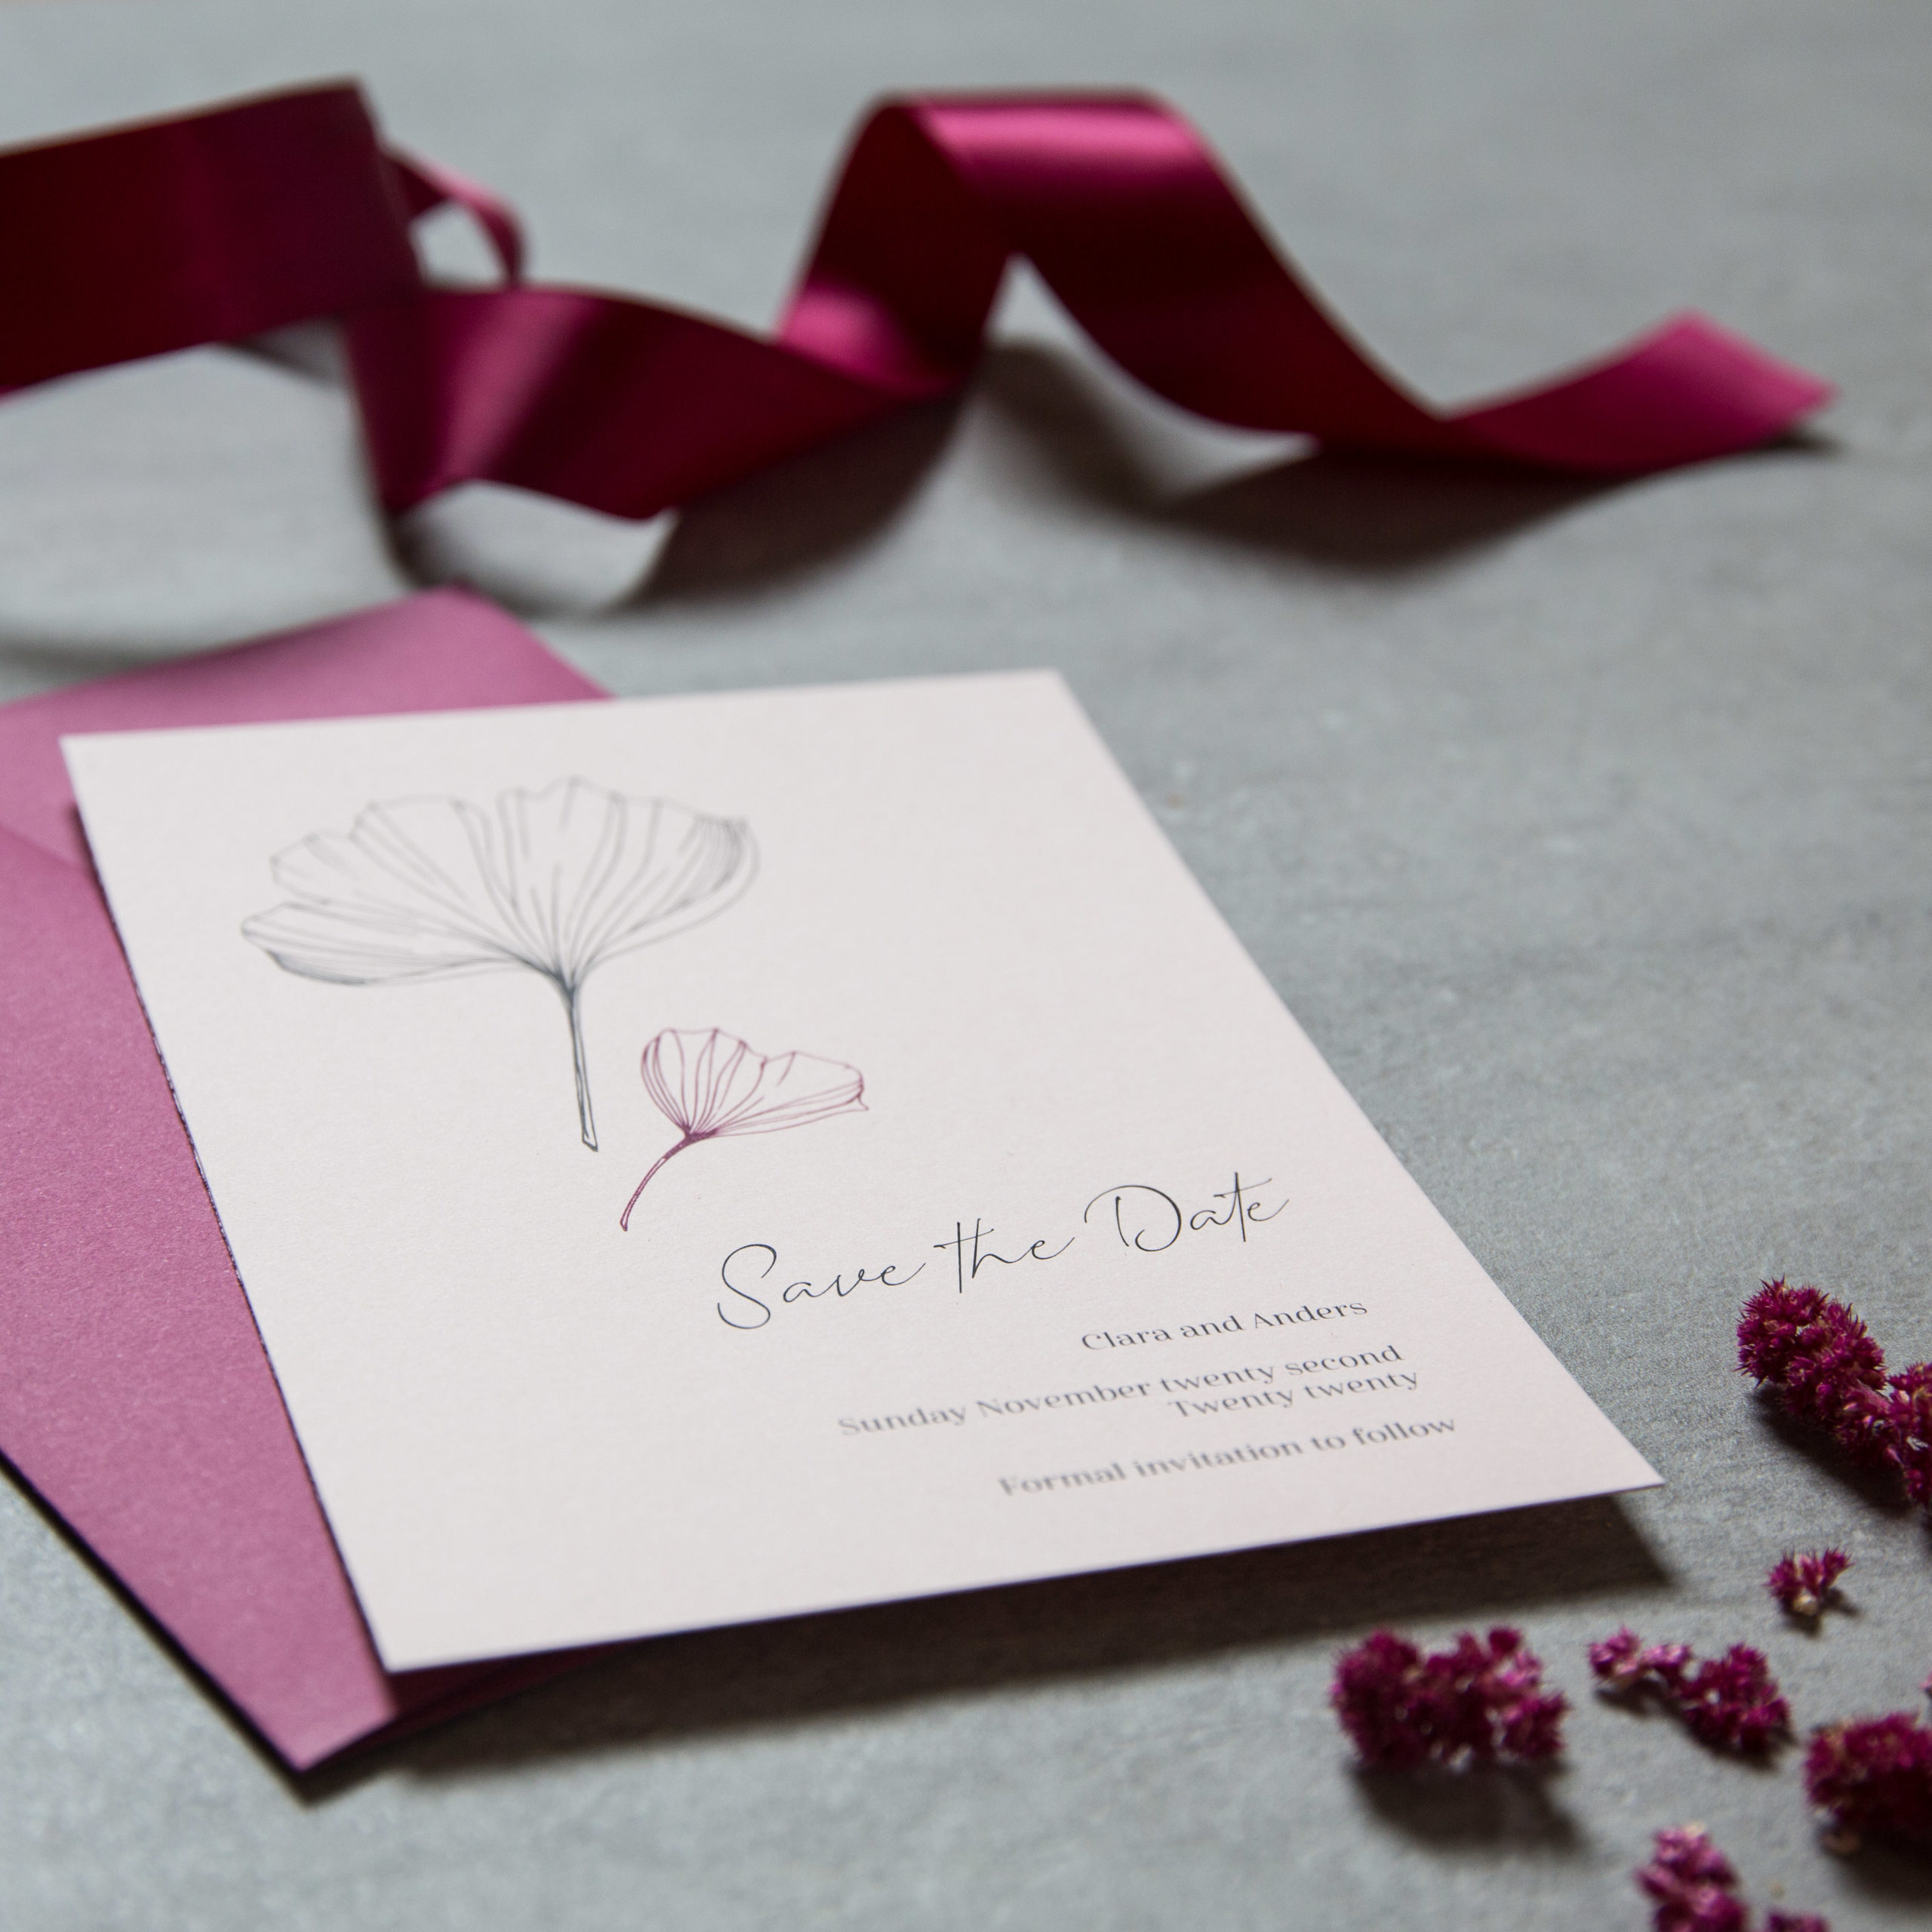 Save the date card with ginkgo leaf design and plum envelope